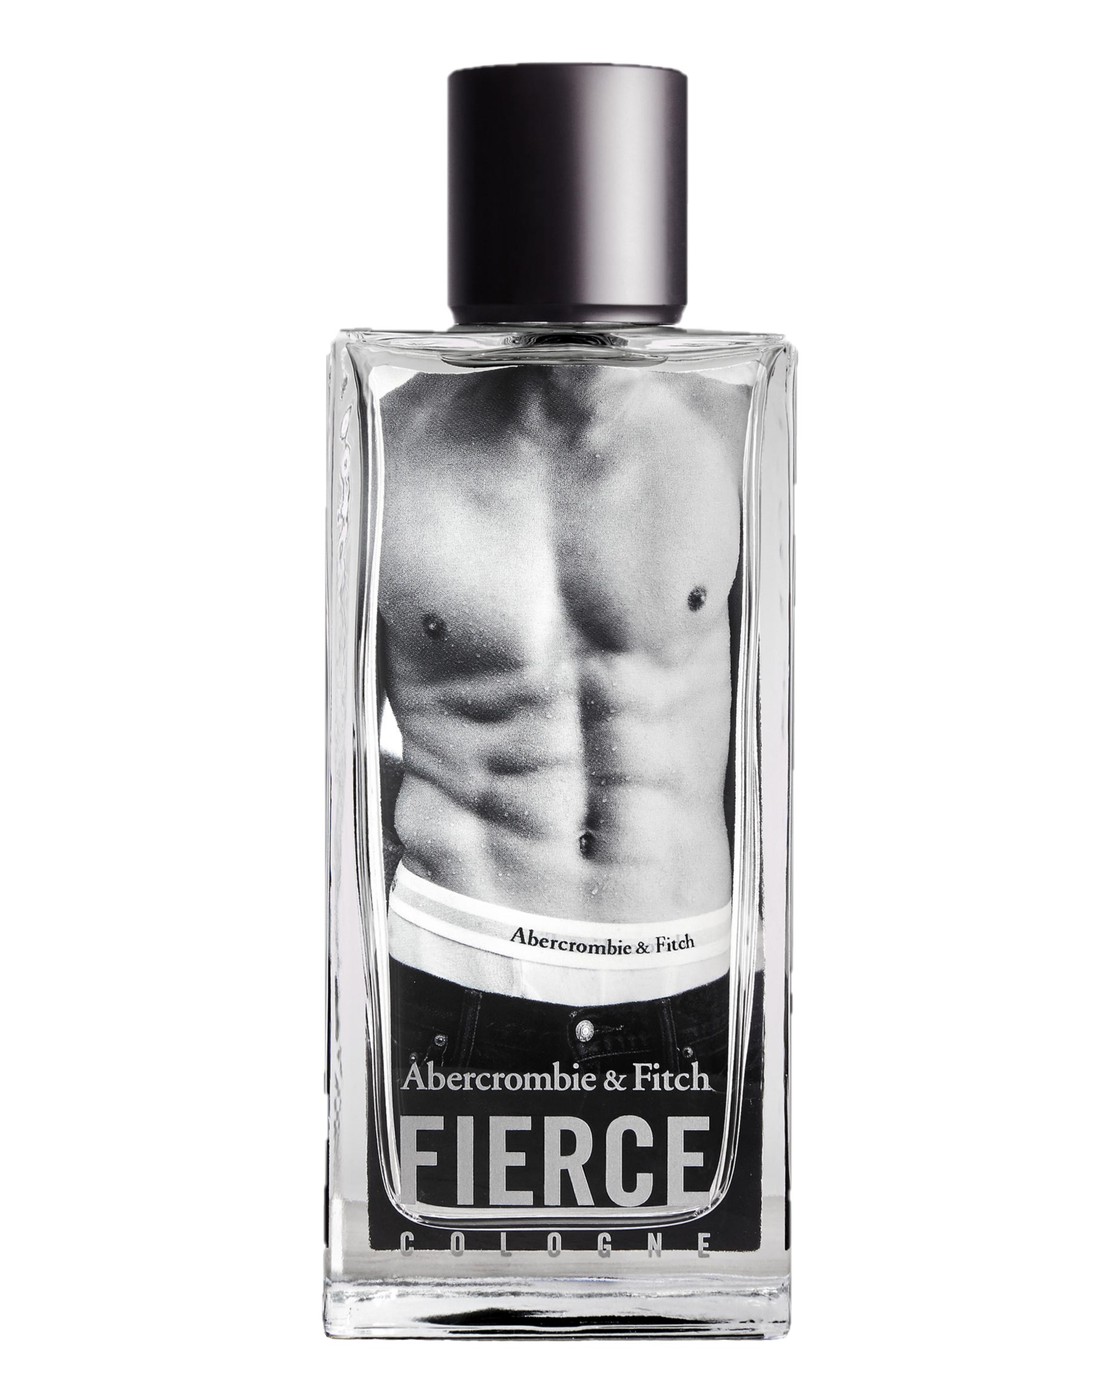 Парфюм Abercrombie & Fitch Fierce cologne 296 мл